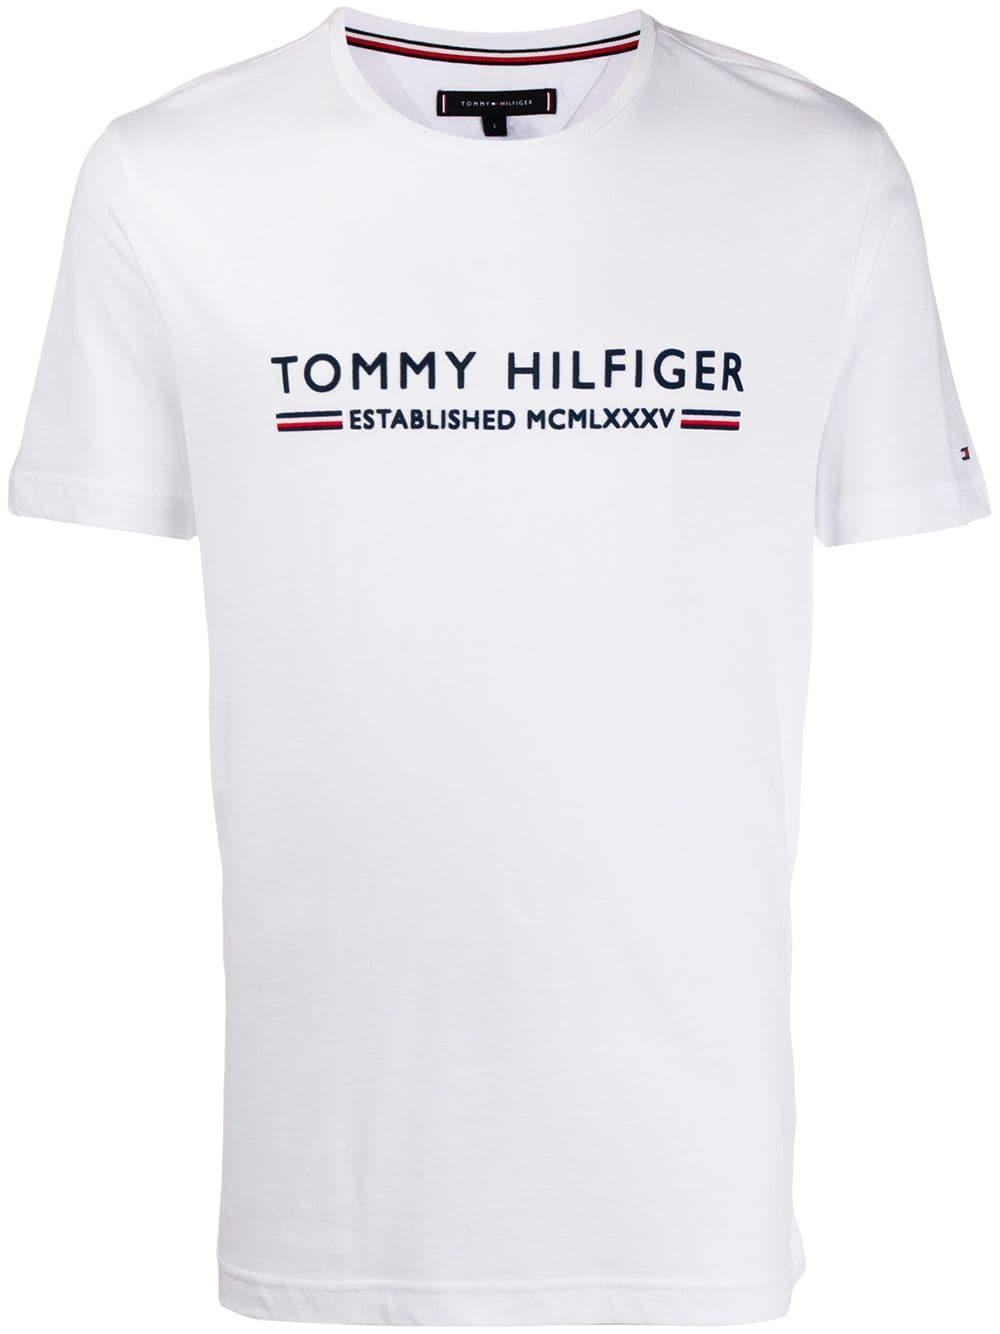 Tommy Hilfiger Cotton Mcmlxxxv T-shirt in White for Men - Lyst